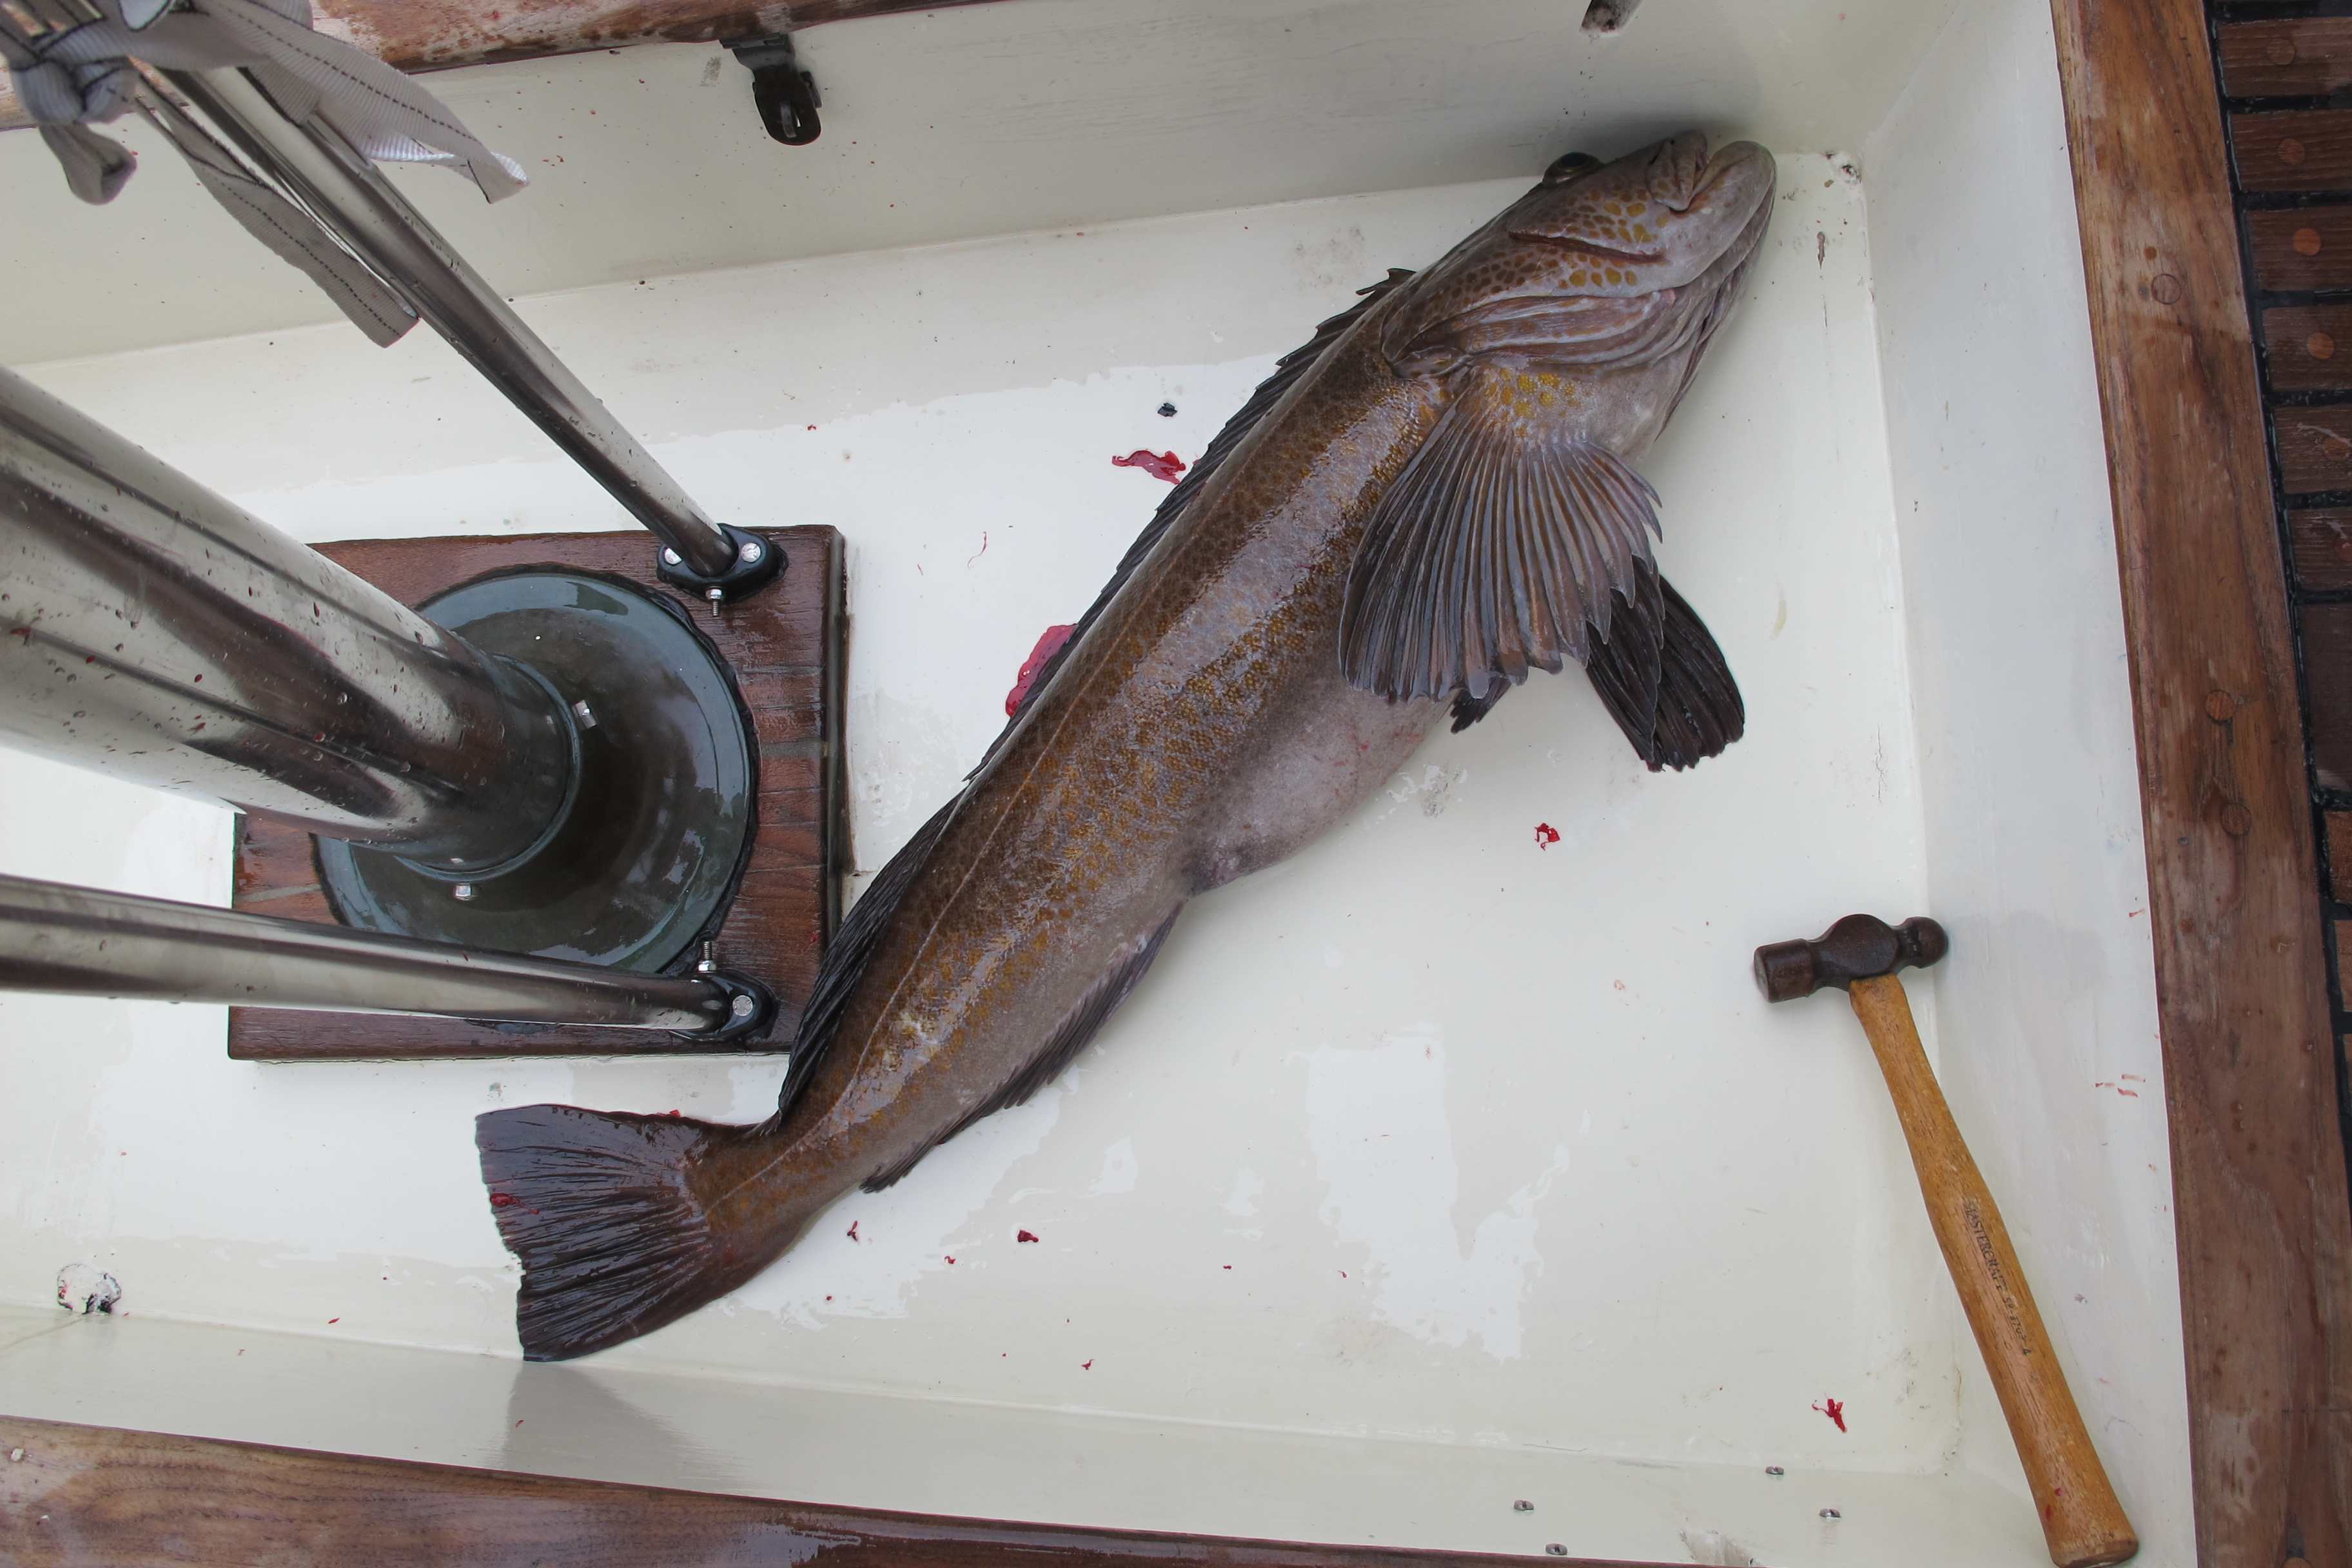 Our biggest Ling Cod of the trip. 17lbs. Still breaks my heart to end a life. 